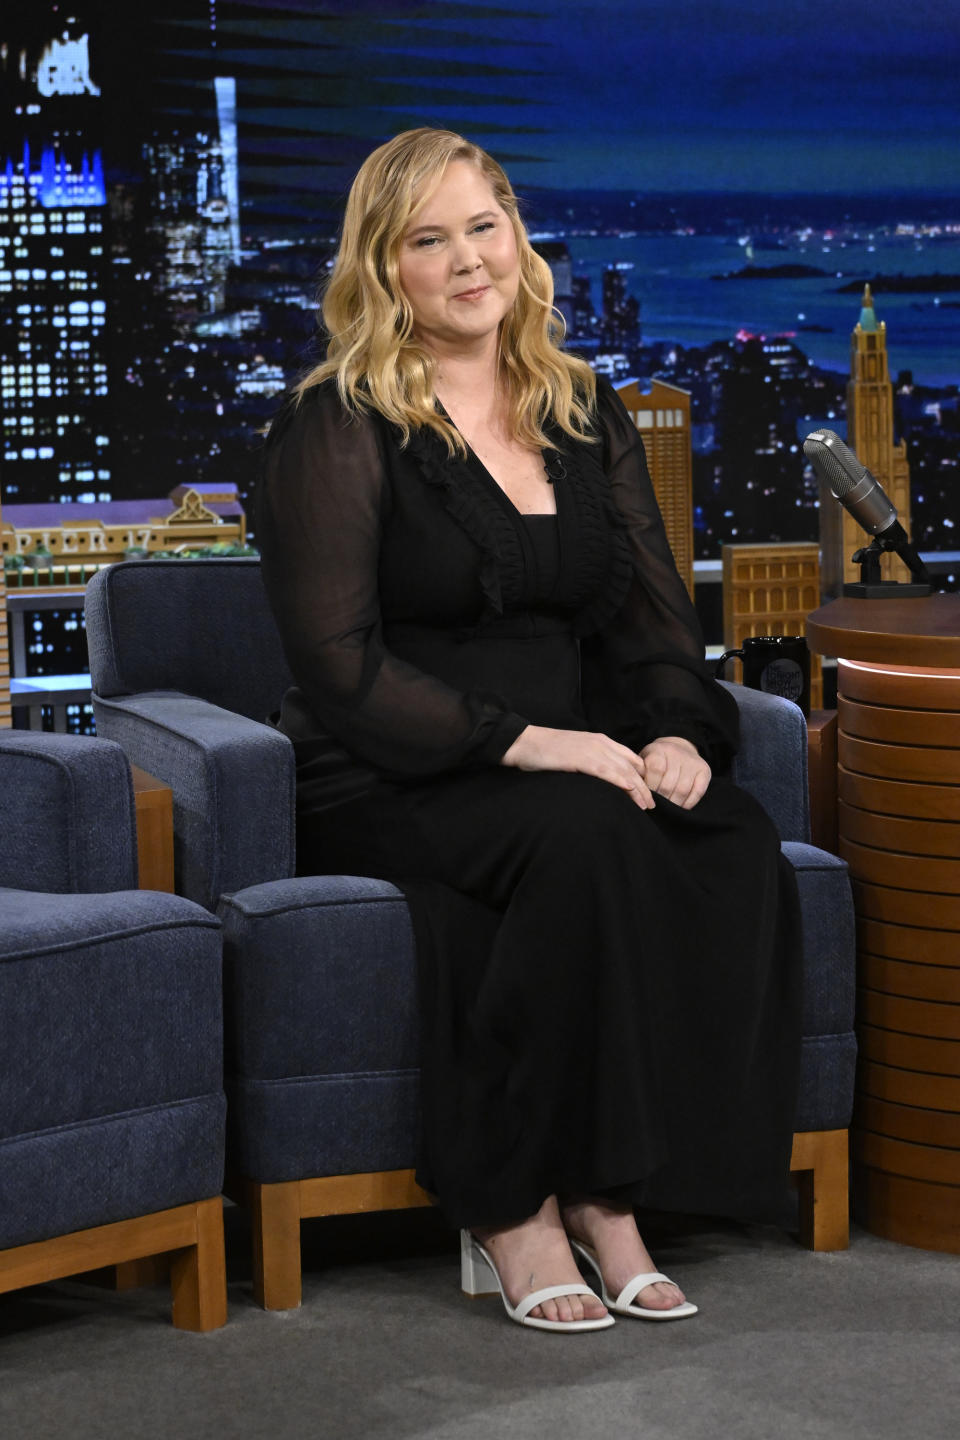 Amy Schumer revealed she was diagnosed with Cushing's Syndrome. (Image via Getty Images)